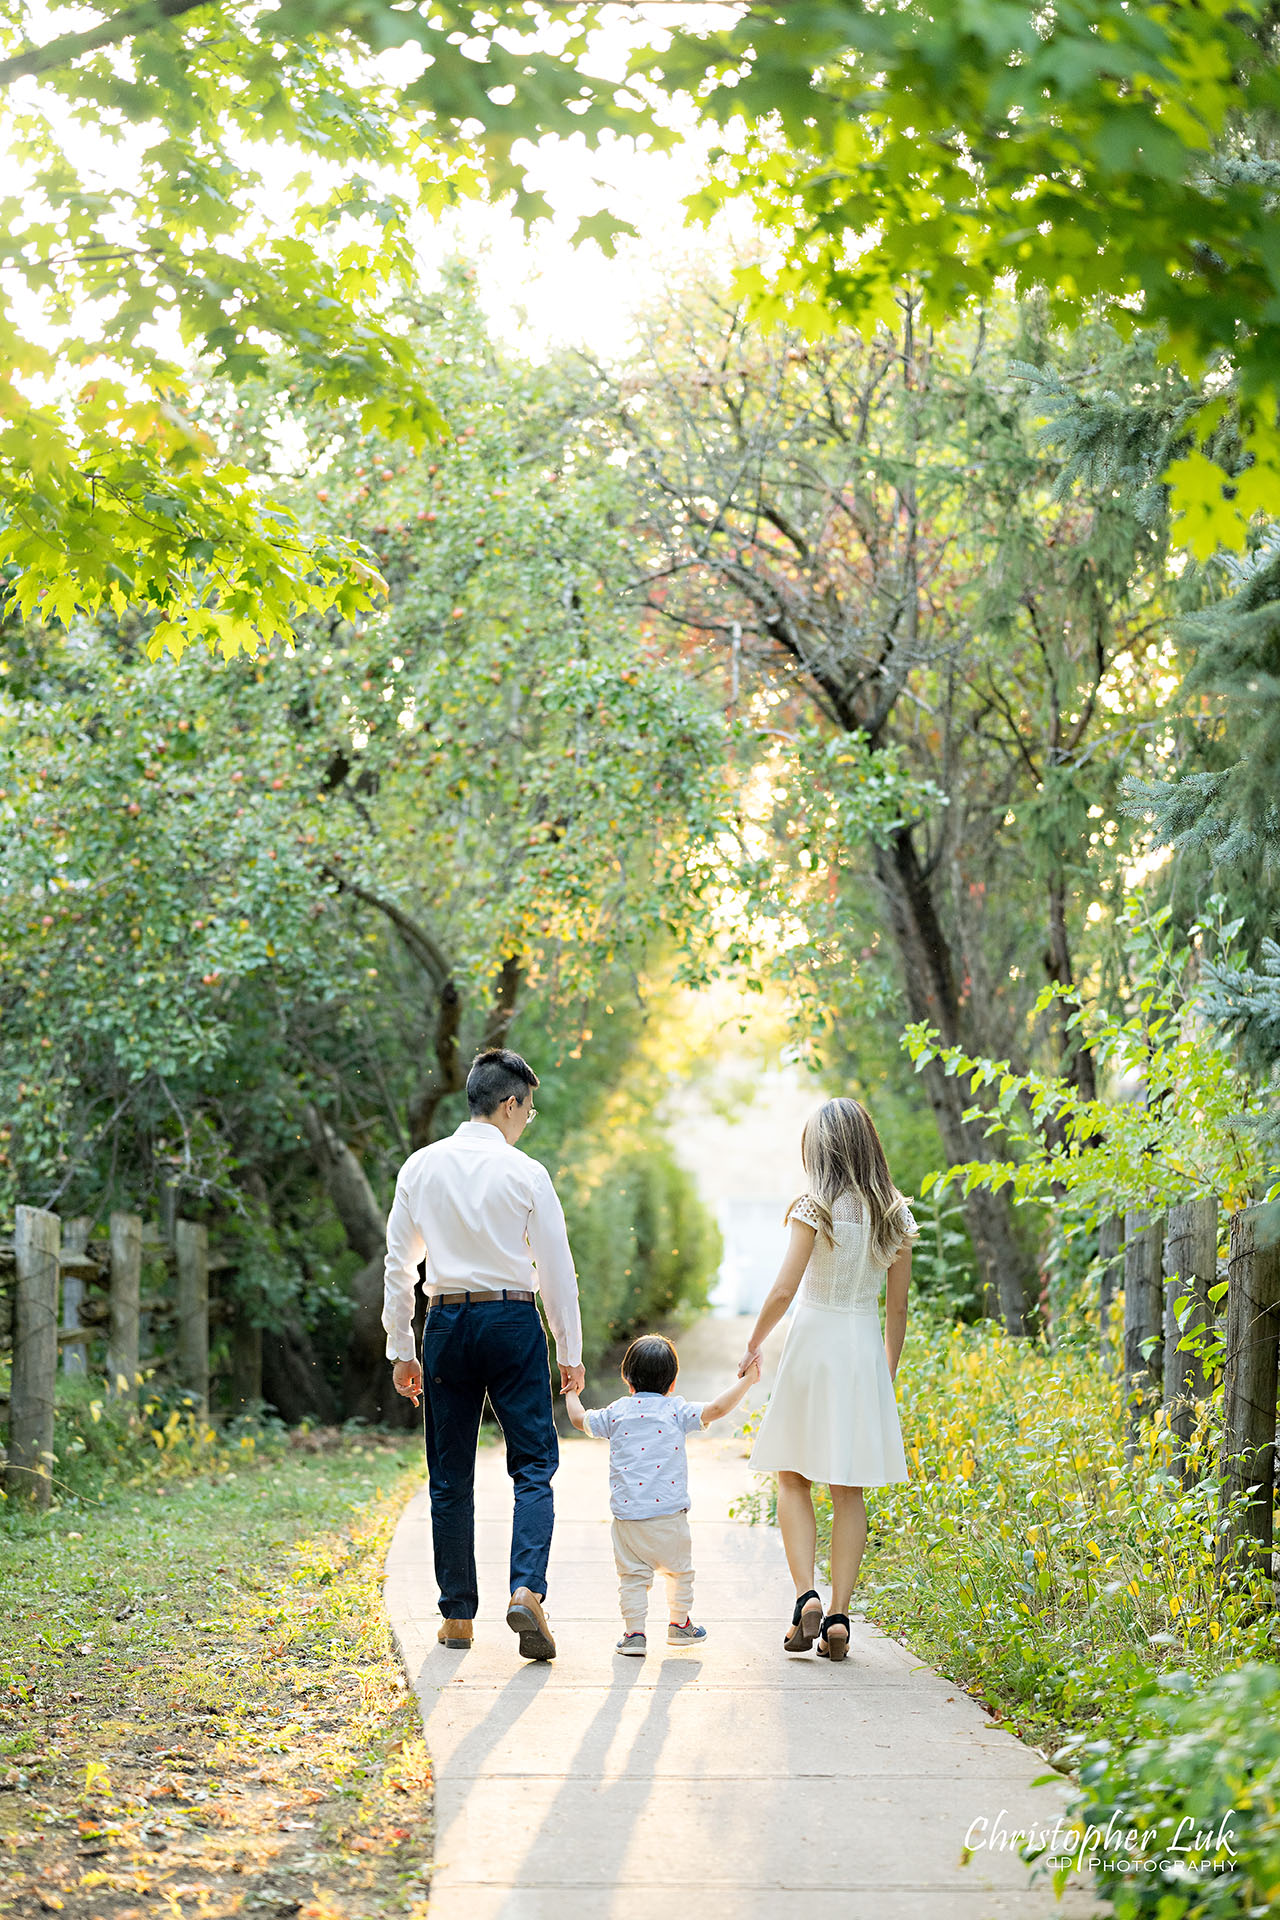 Christopher Luk Markham Family Photographer Photojournalistic Candid Natural Organic Husband Wife Mom Dad Son Child Family Holding Hands Walking Together Portrait